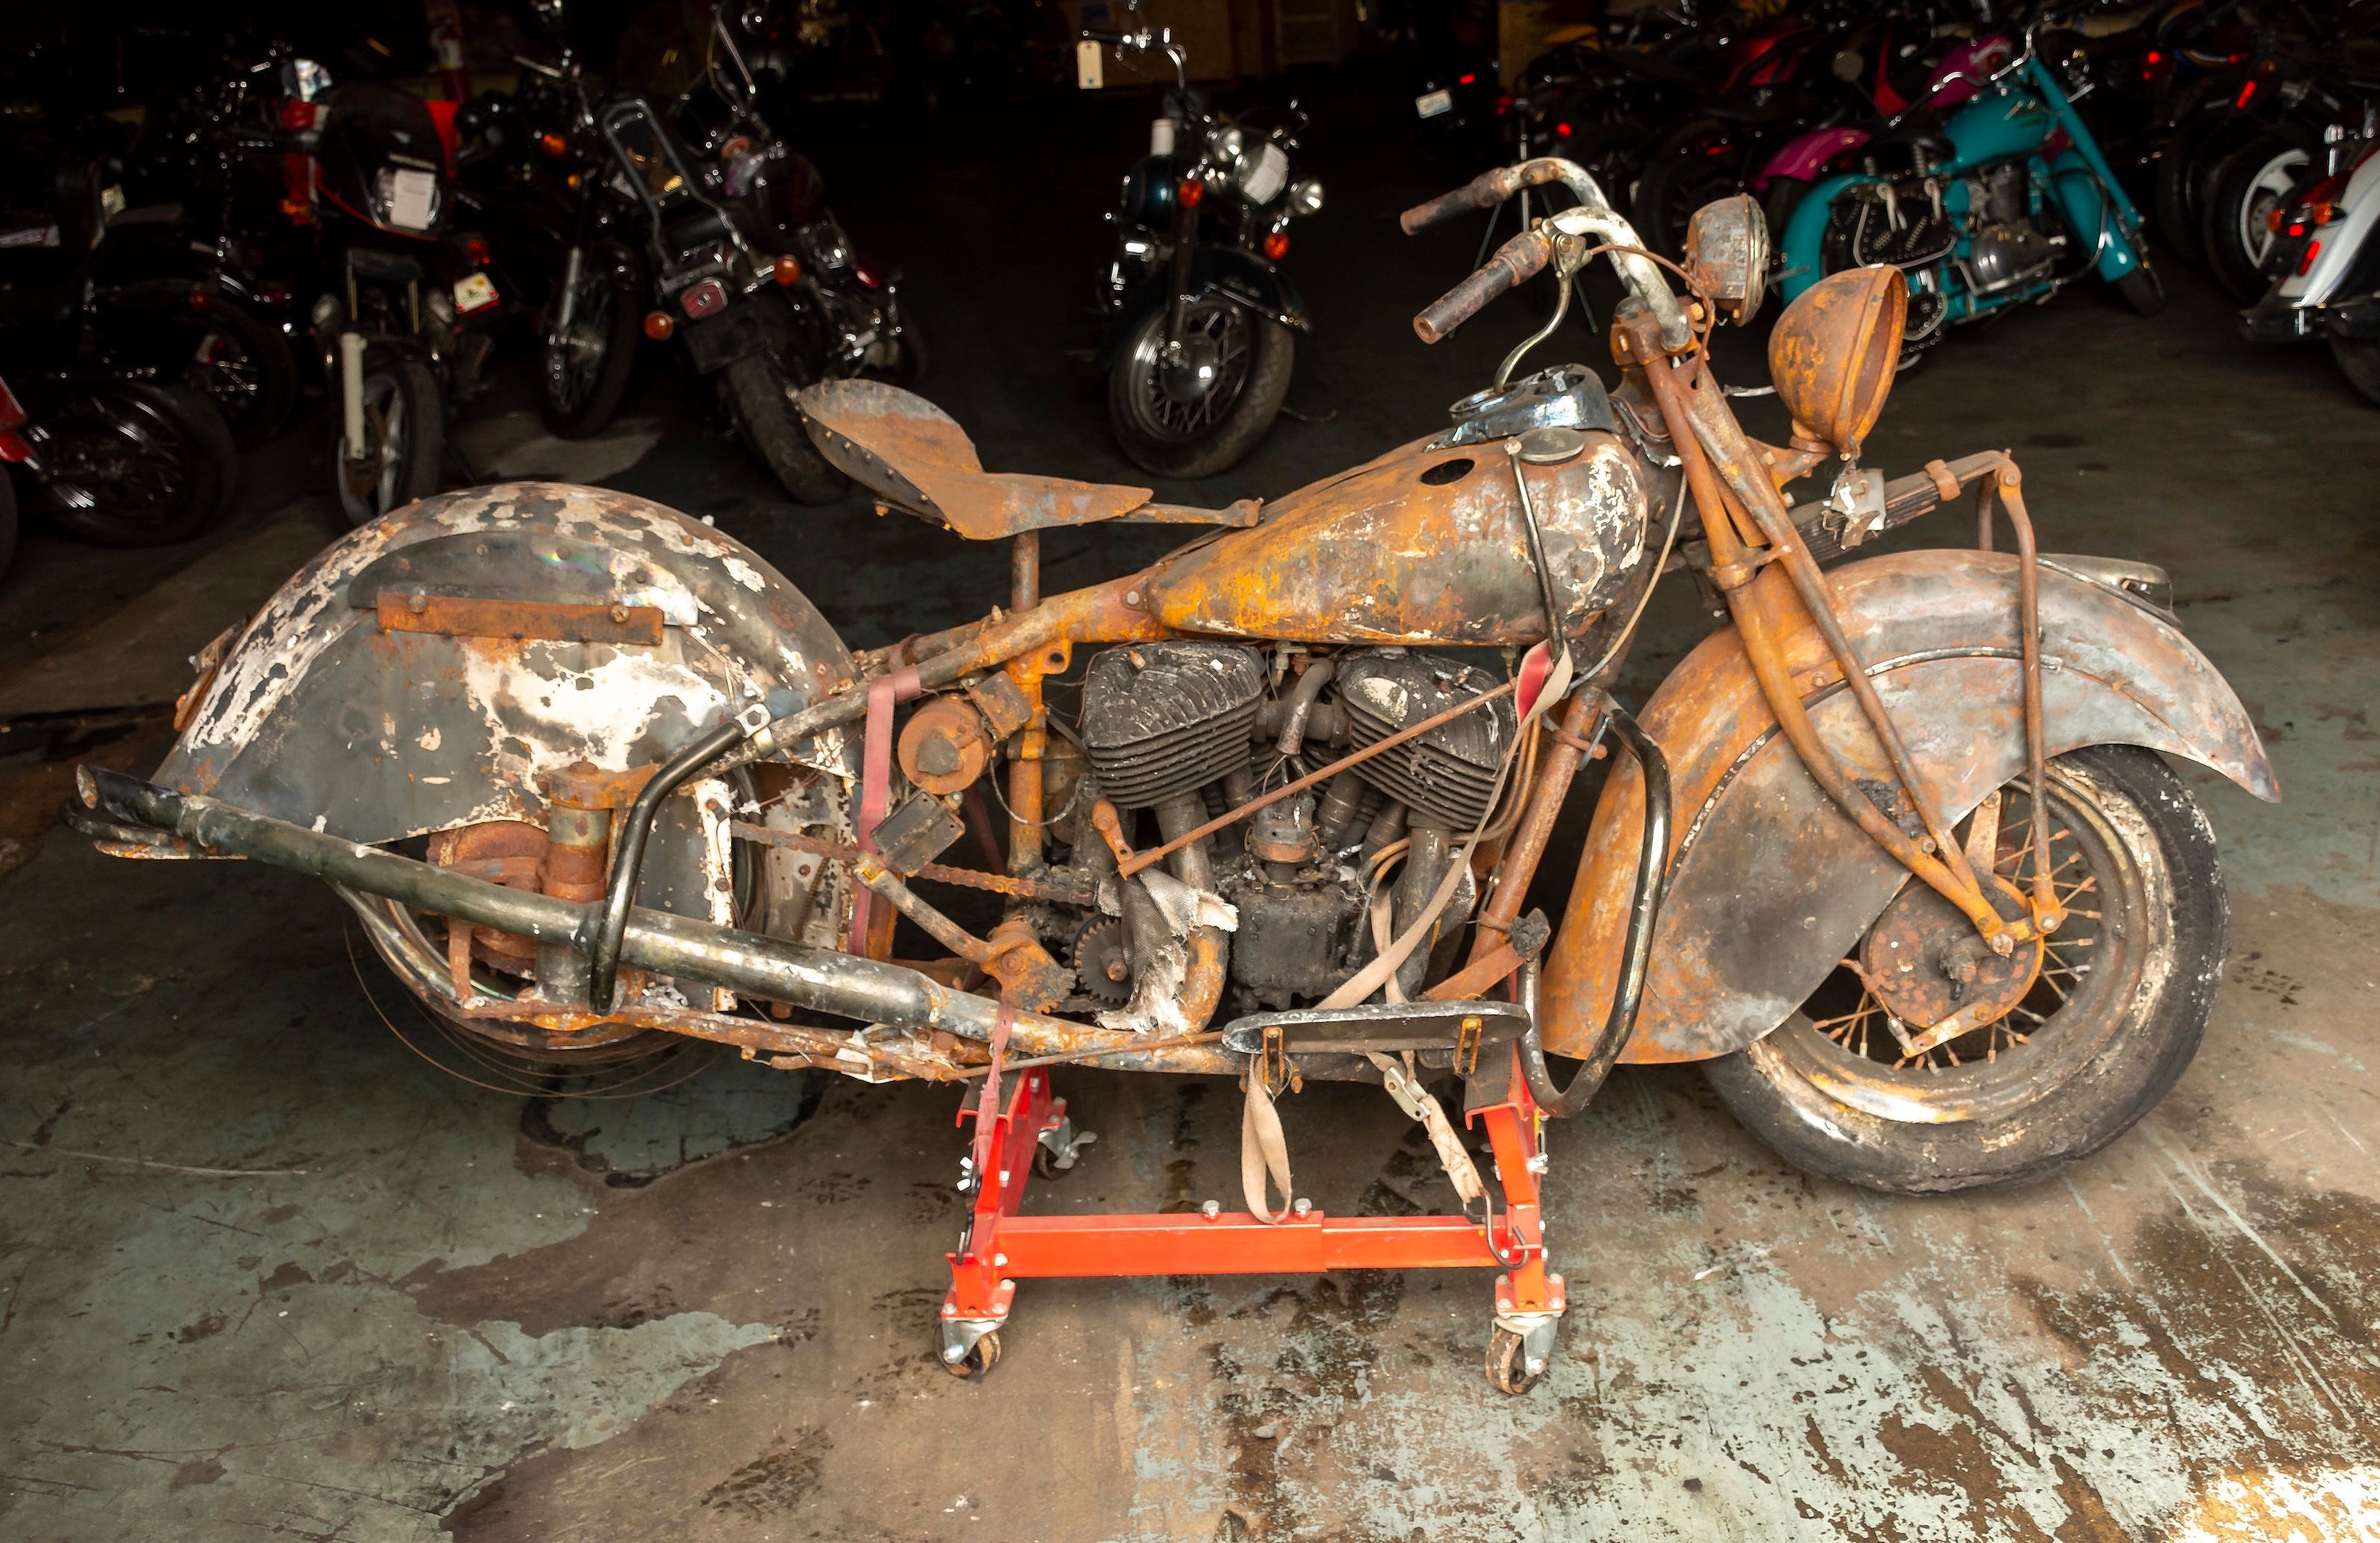 For Sale: A “Lightly Singed” 1940 Indian Chief Project Bike